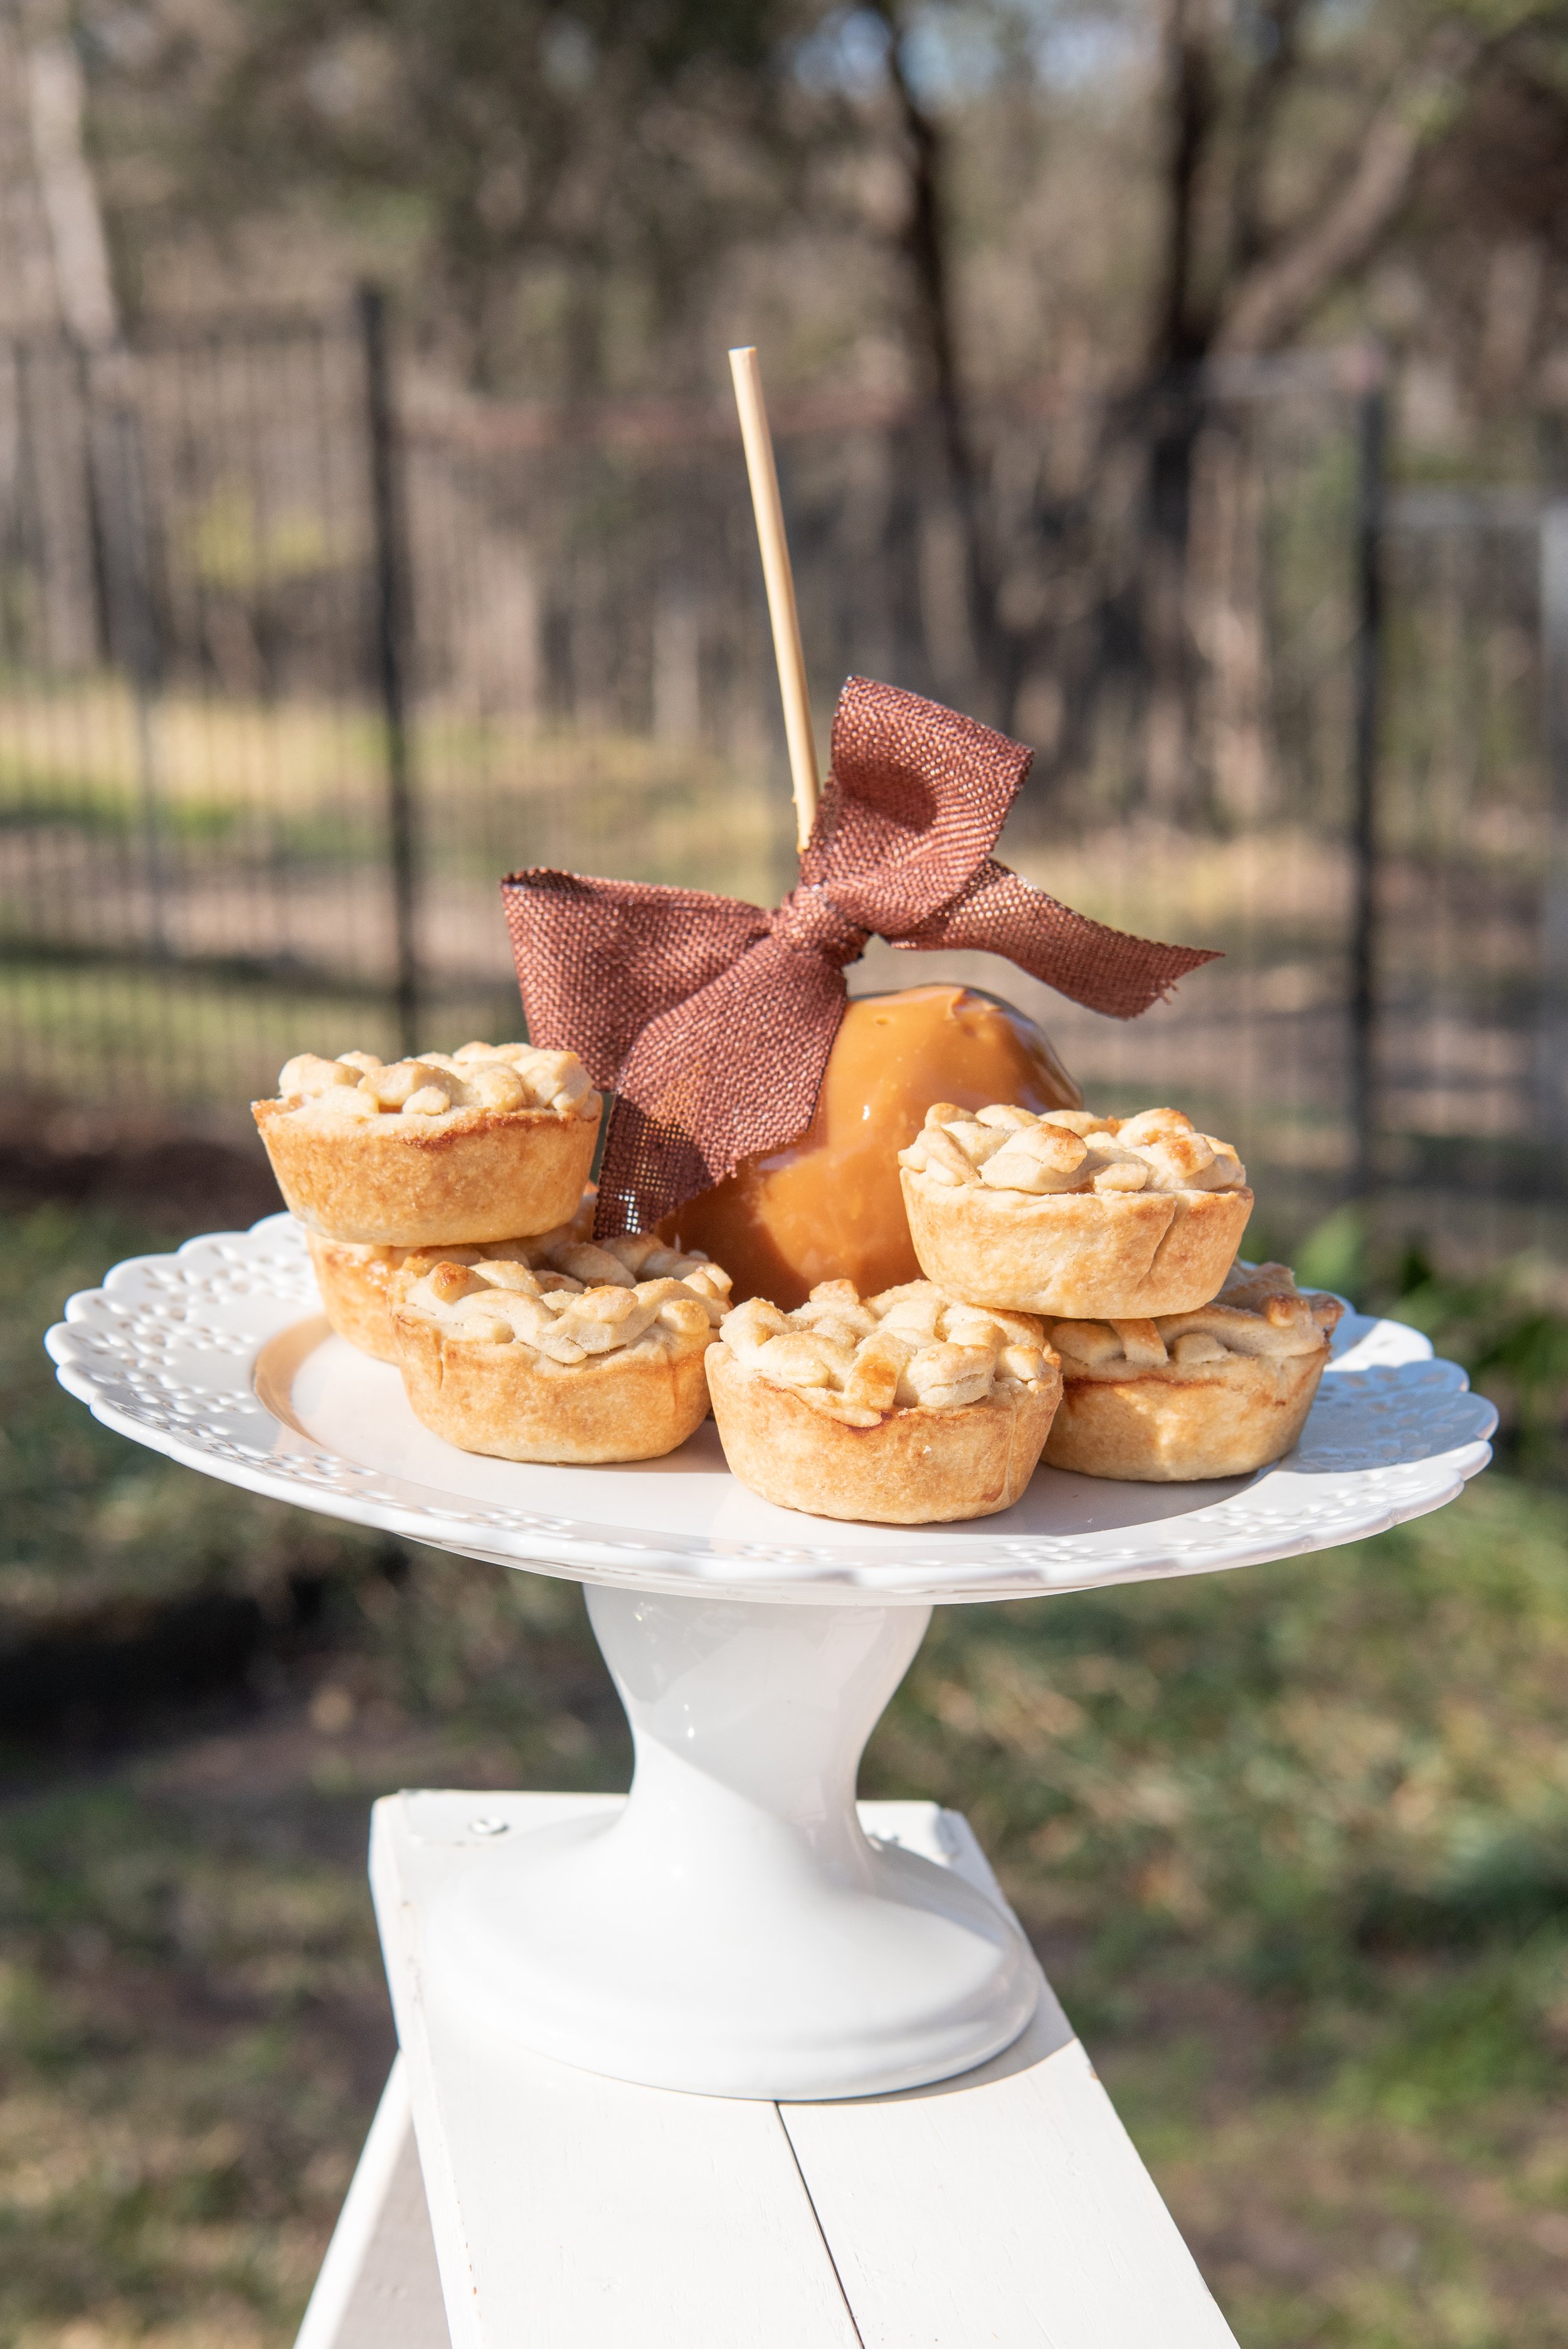 Sweet treats set up on a rustic ladder for a pony-themed first birthday party. Get details from event designer Carolina of MINT Event Design in Austin, TX at www.minteventdesign.com!